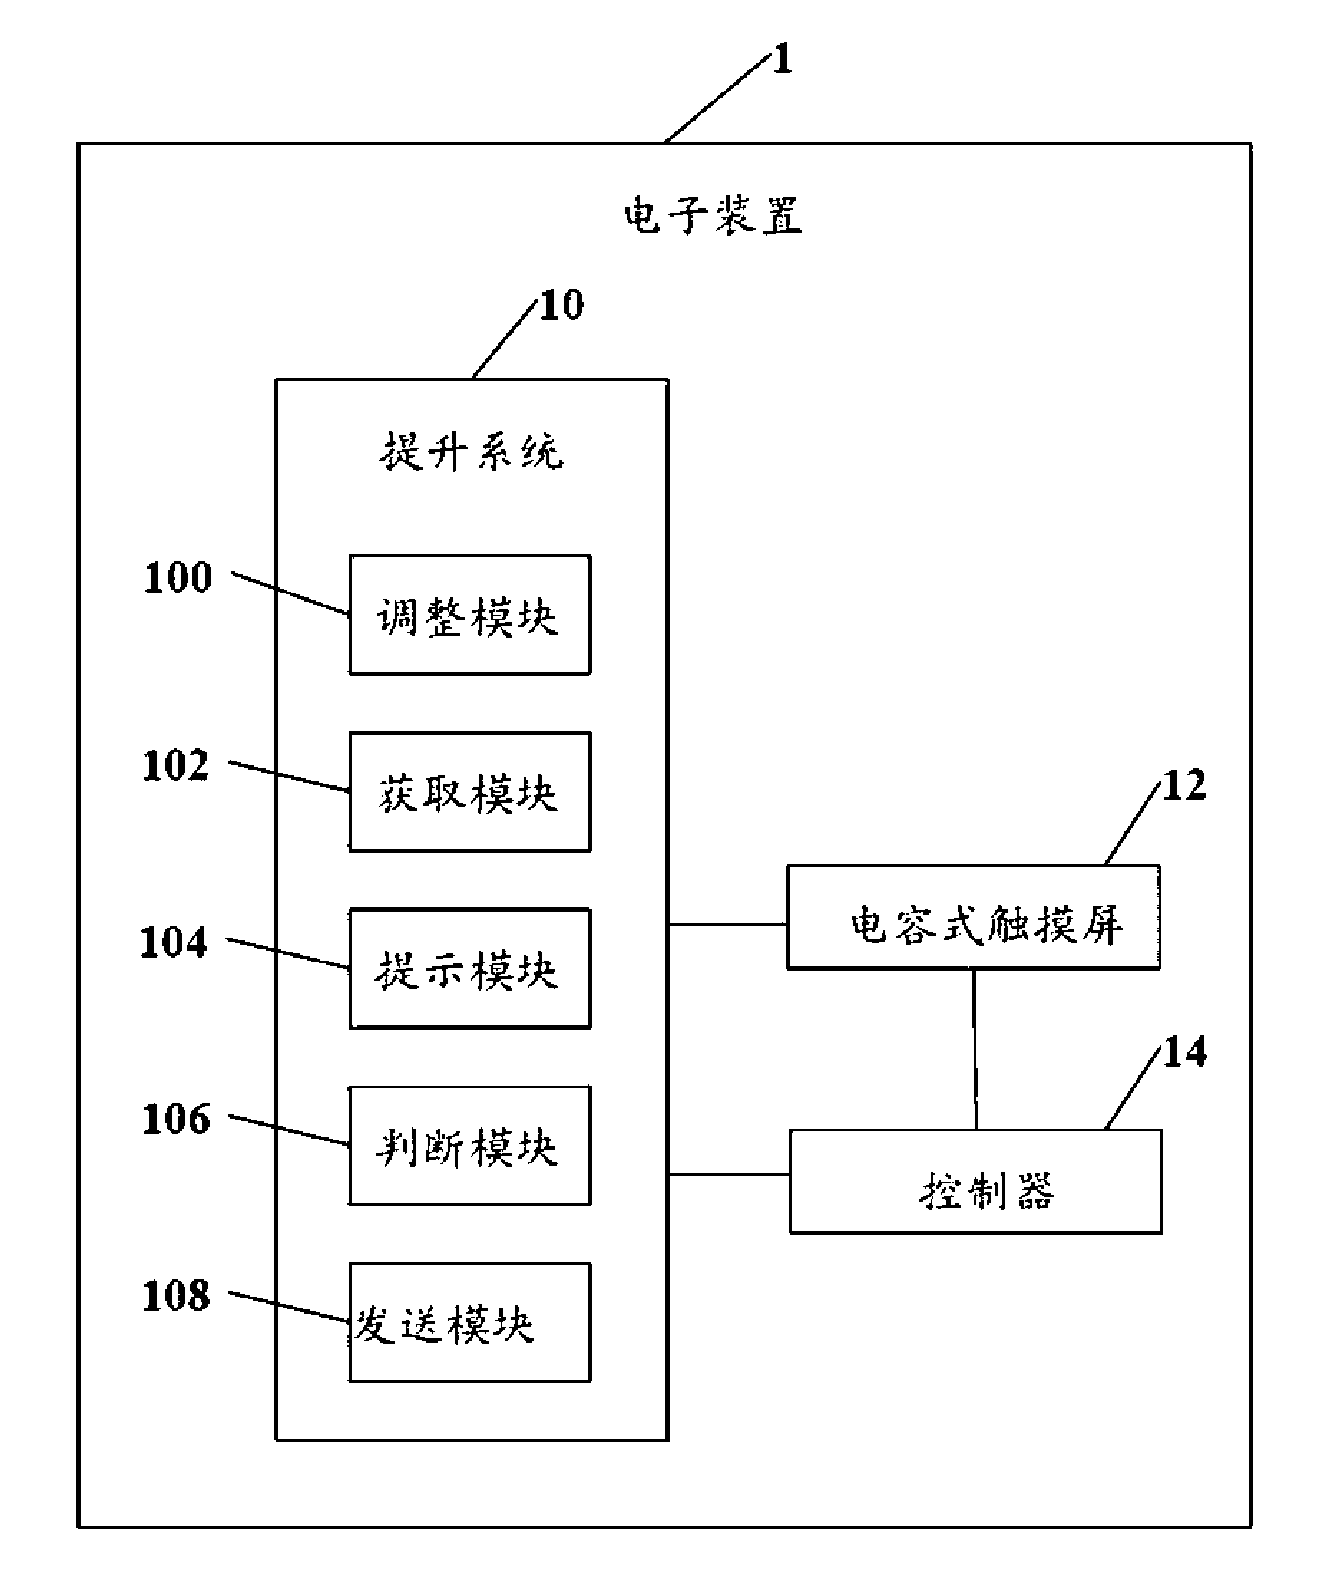 System and method for improving input accuracy of capacitive touch screen